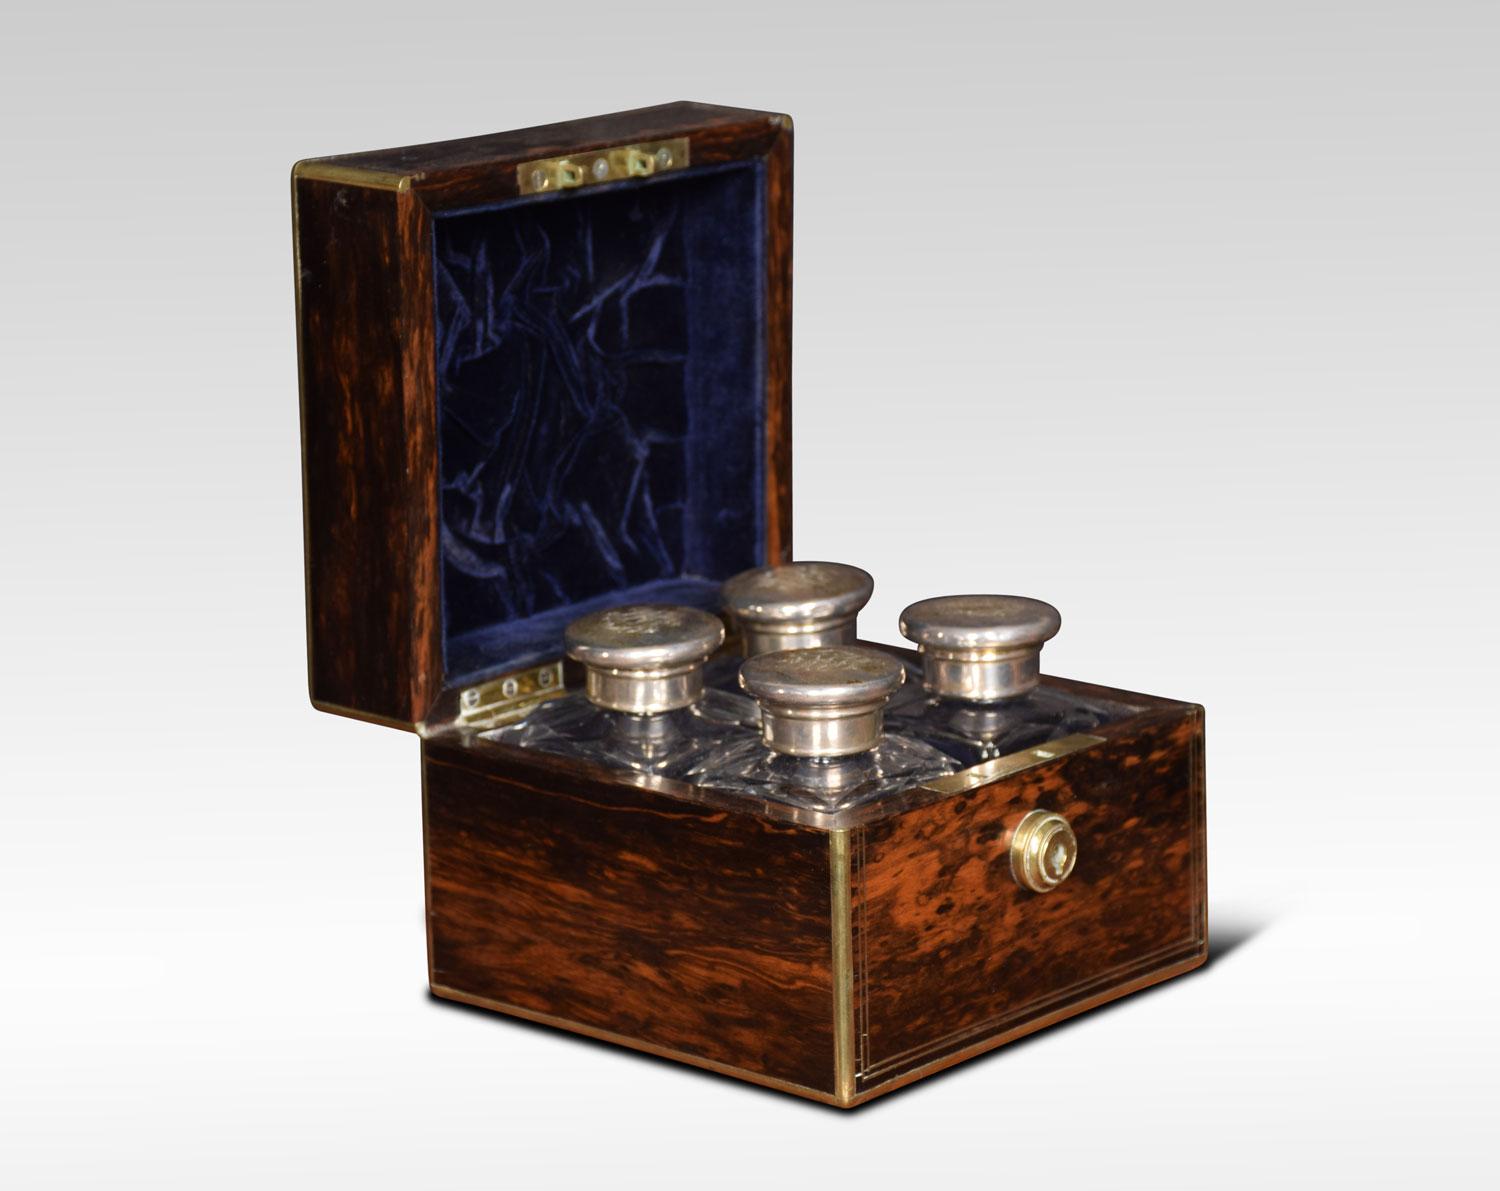 A set of four cologne or perfume bottles in fitted Coromandel and brass case. The four silvered lids with etched motifs above cut-glass square bottles. The box marked Austin of Dublin. Retaining its original leather outer case.
Dimensions:
Height